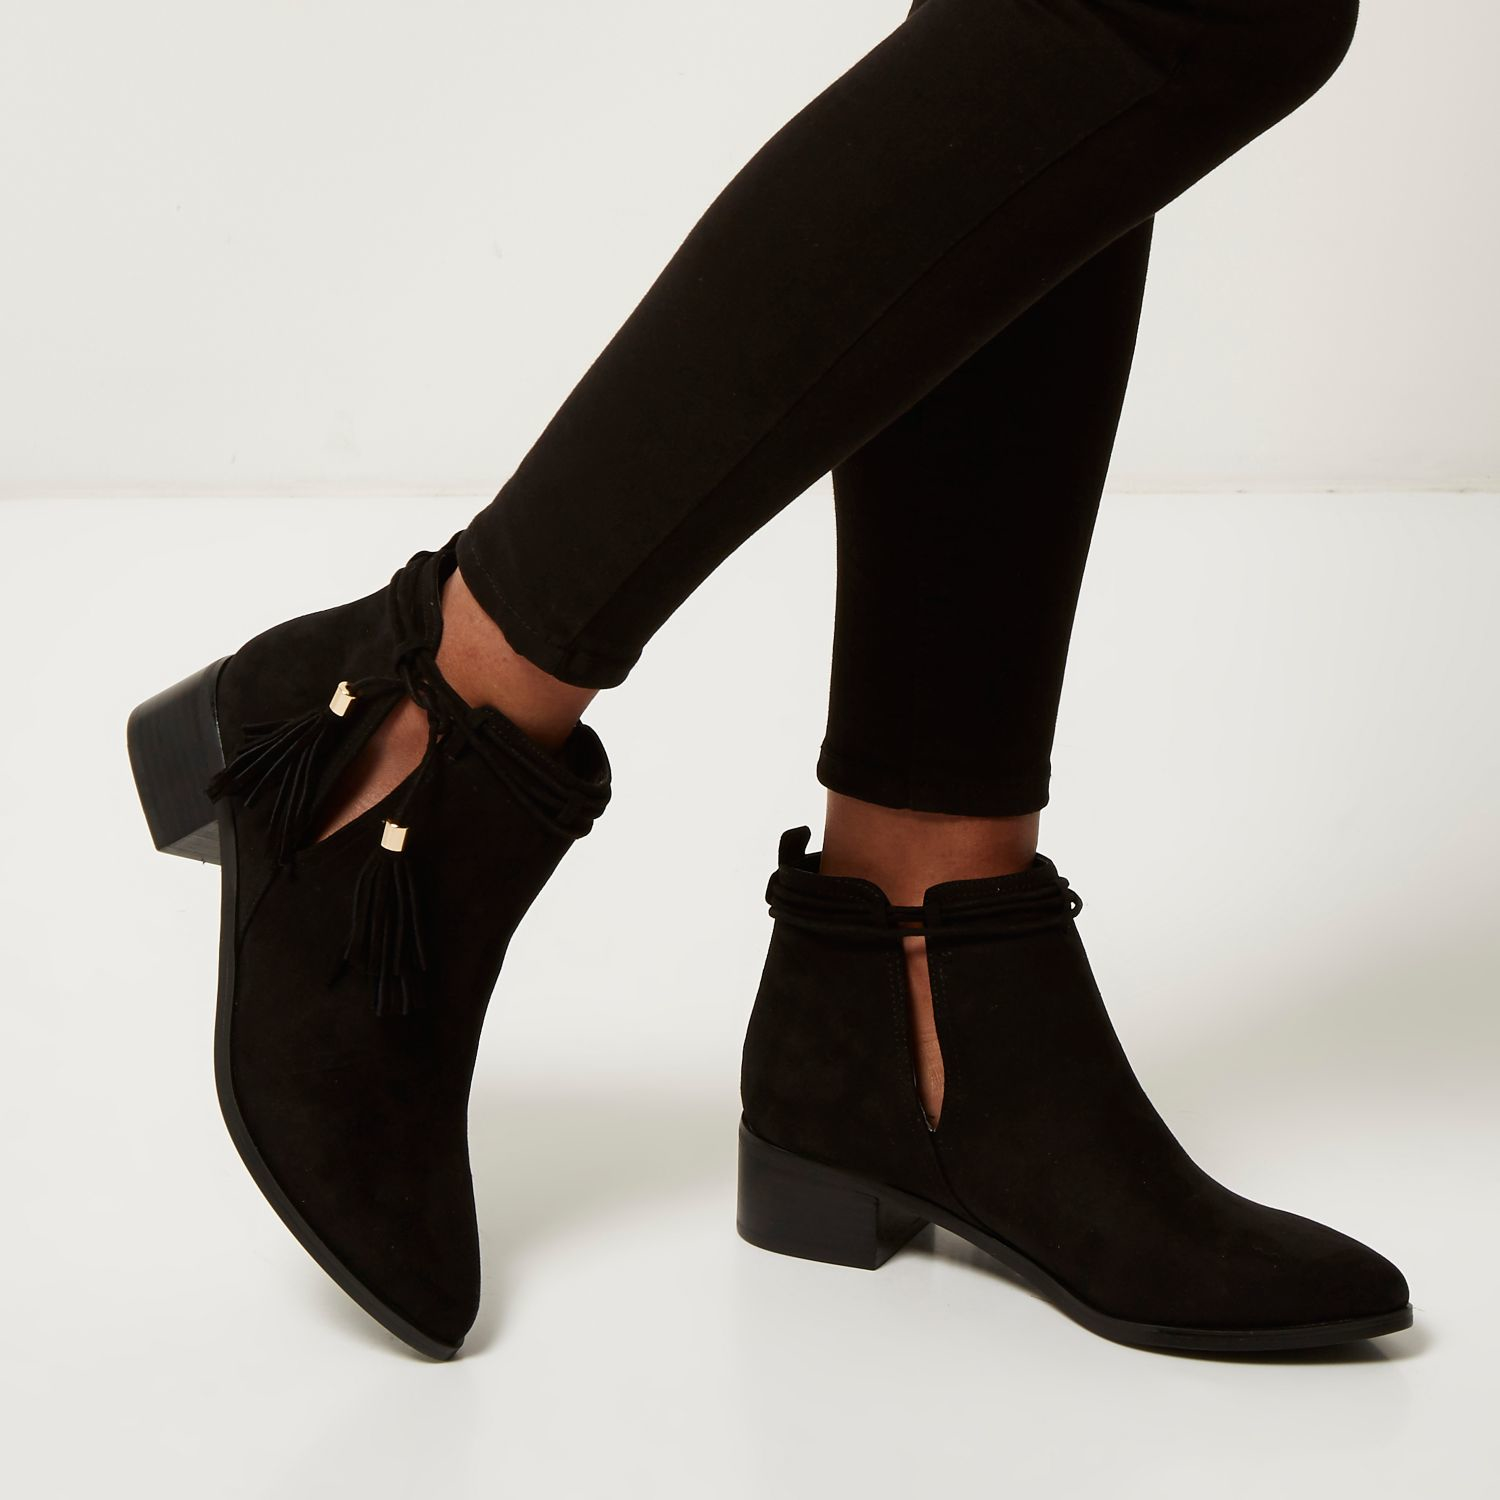 River Island Suede Black Tassel Cut-out Ankle Boots - Lyst